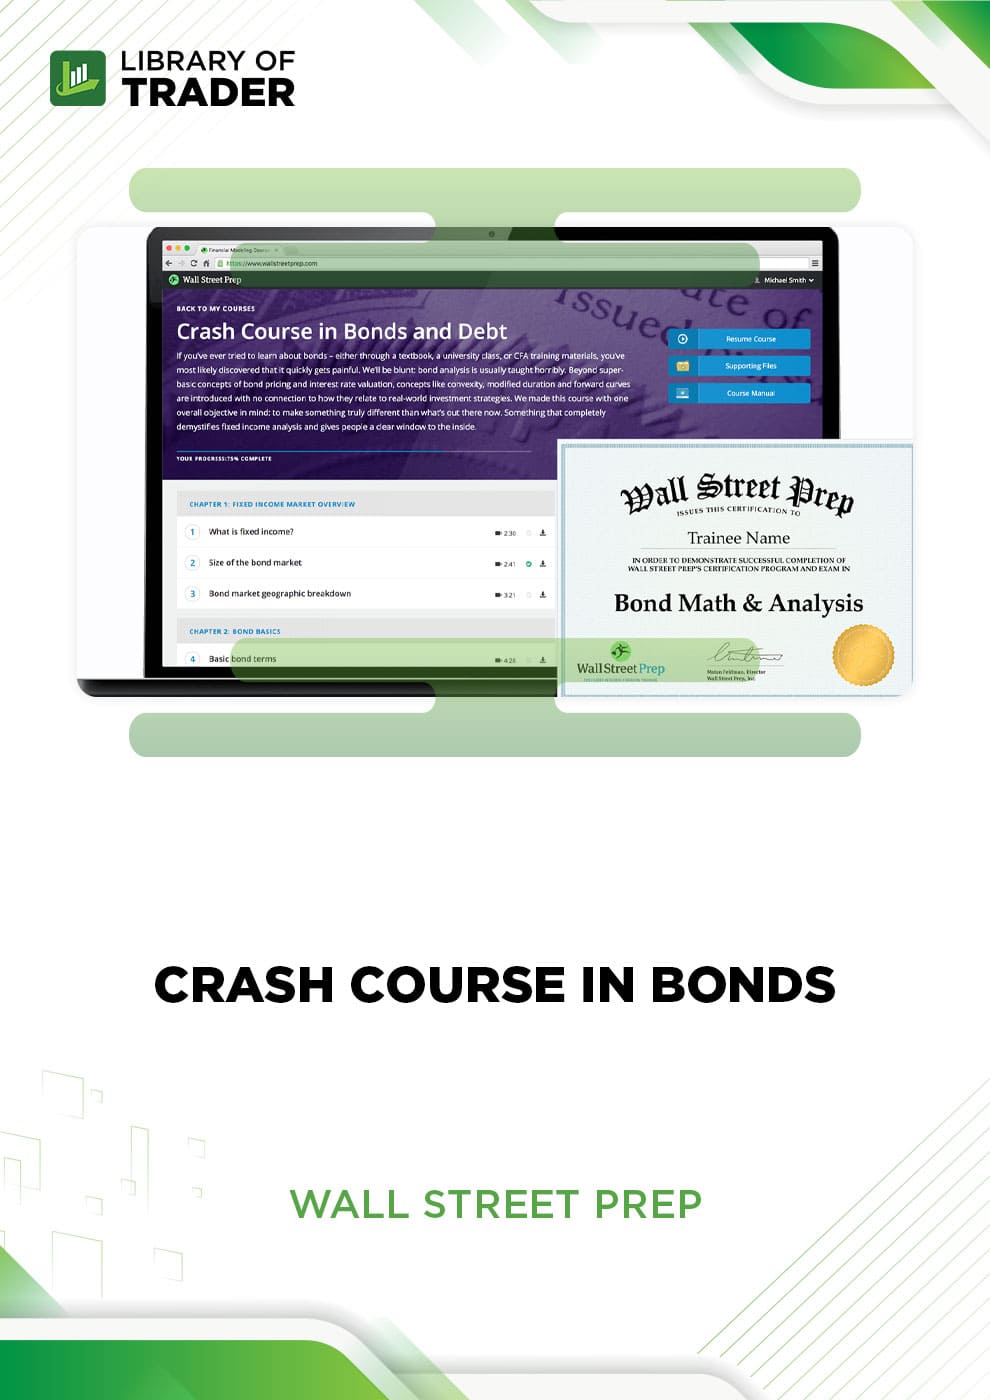 Crash Course in Bonds by Wall Street Prep